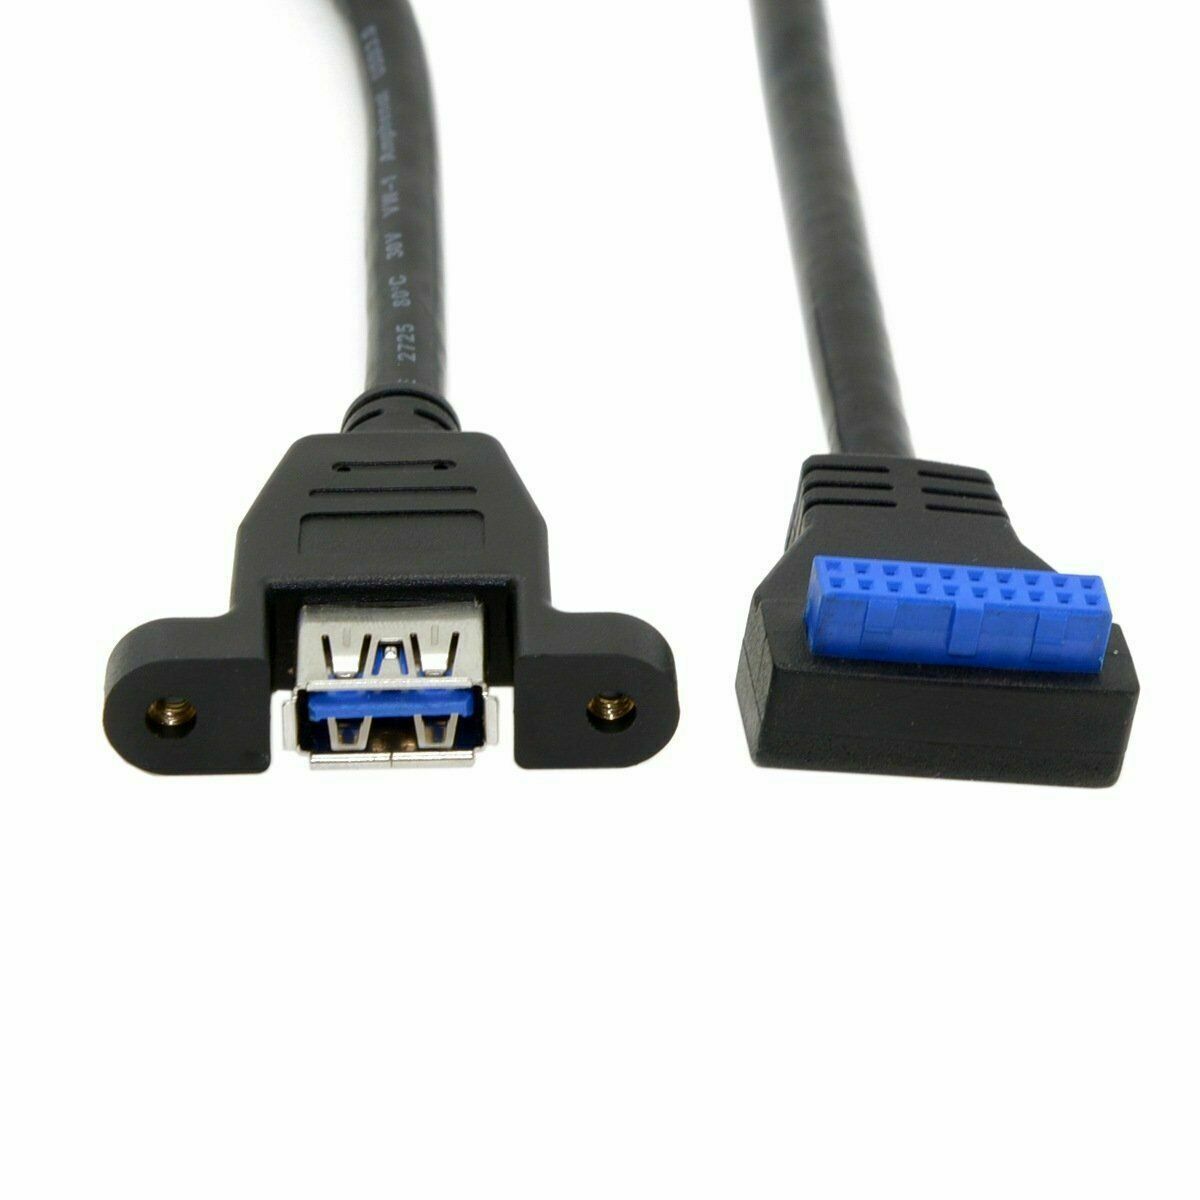 USB-A 3.0 Female Panel Mount to Motherboard 20 Pin Female Header Cable 0.25m